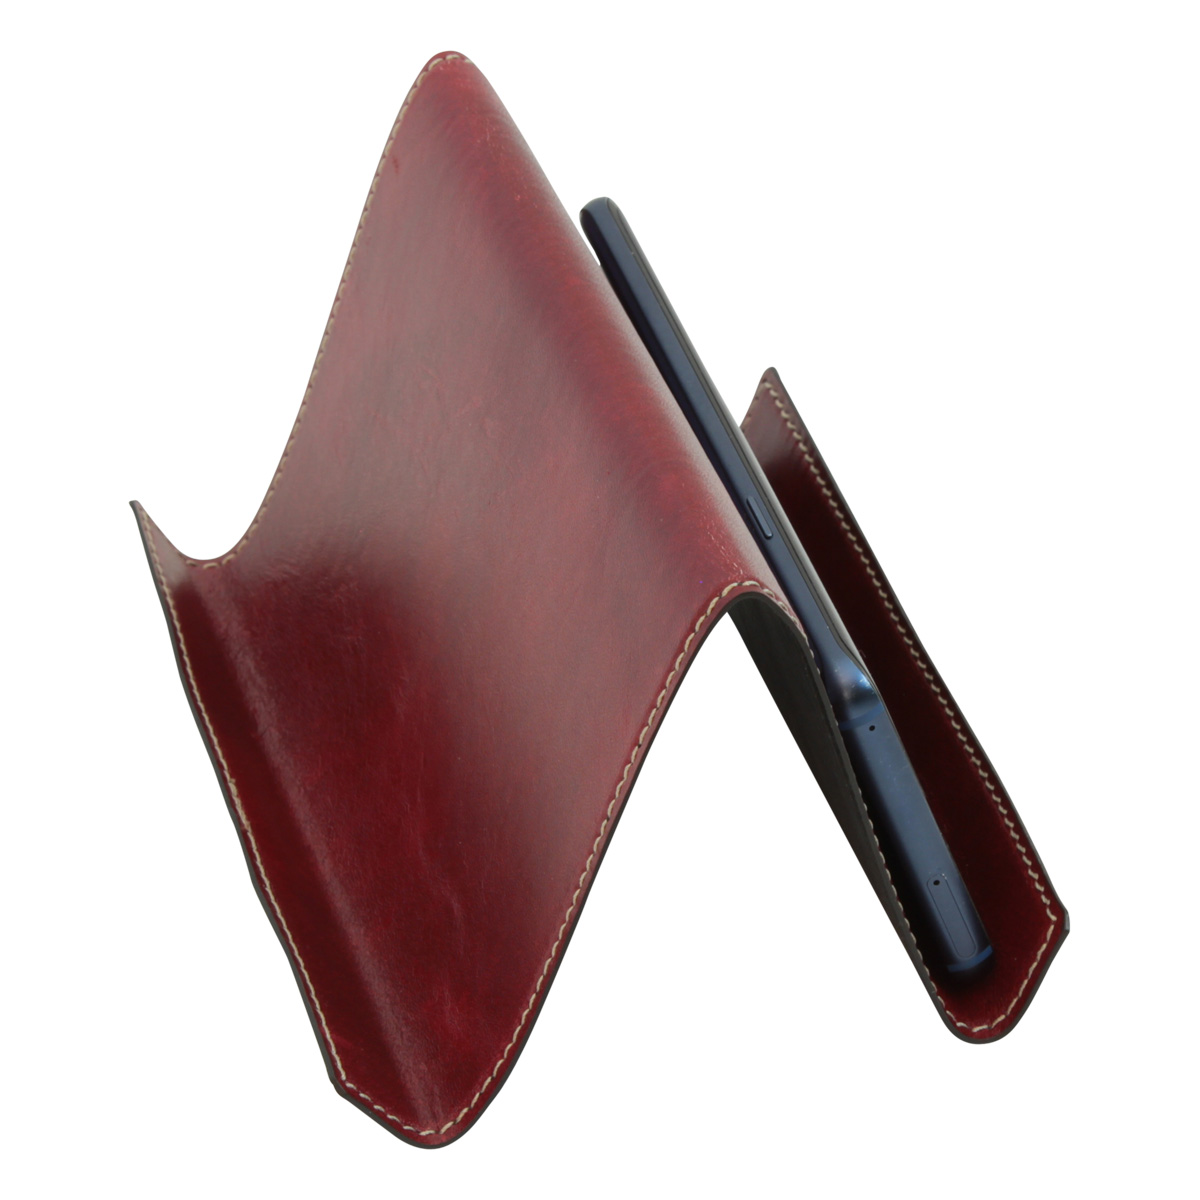 Leather ipad and iphone stand - red|764089RO|Old Angler Firenze